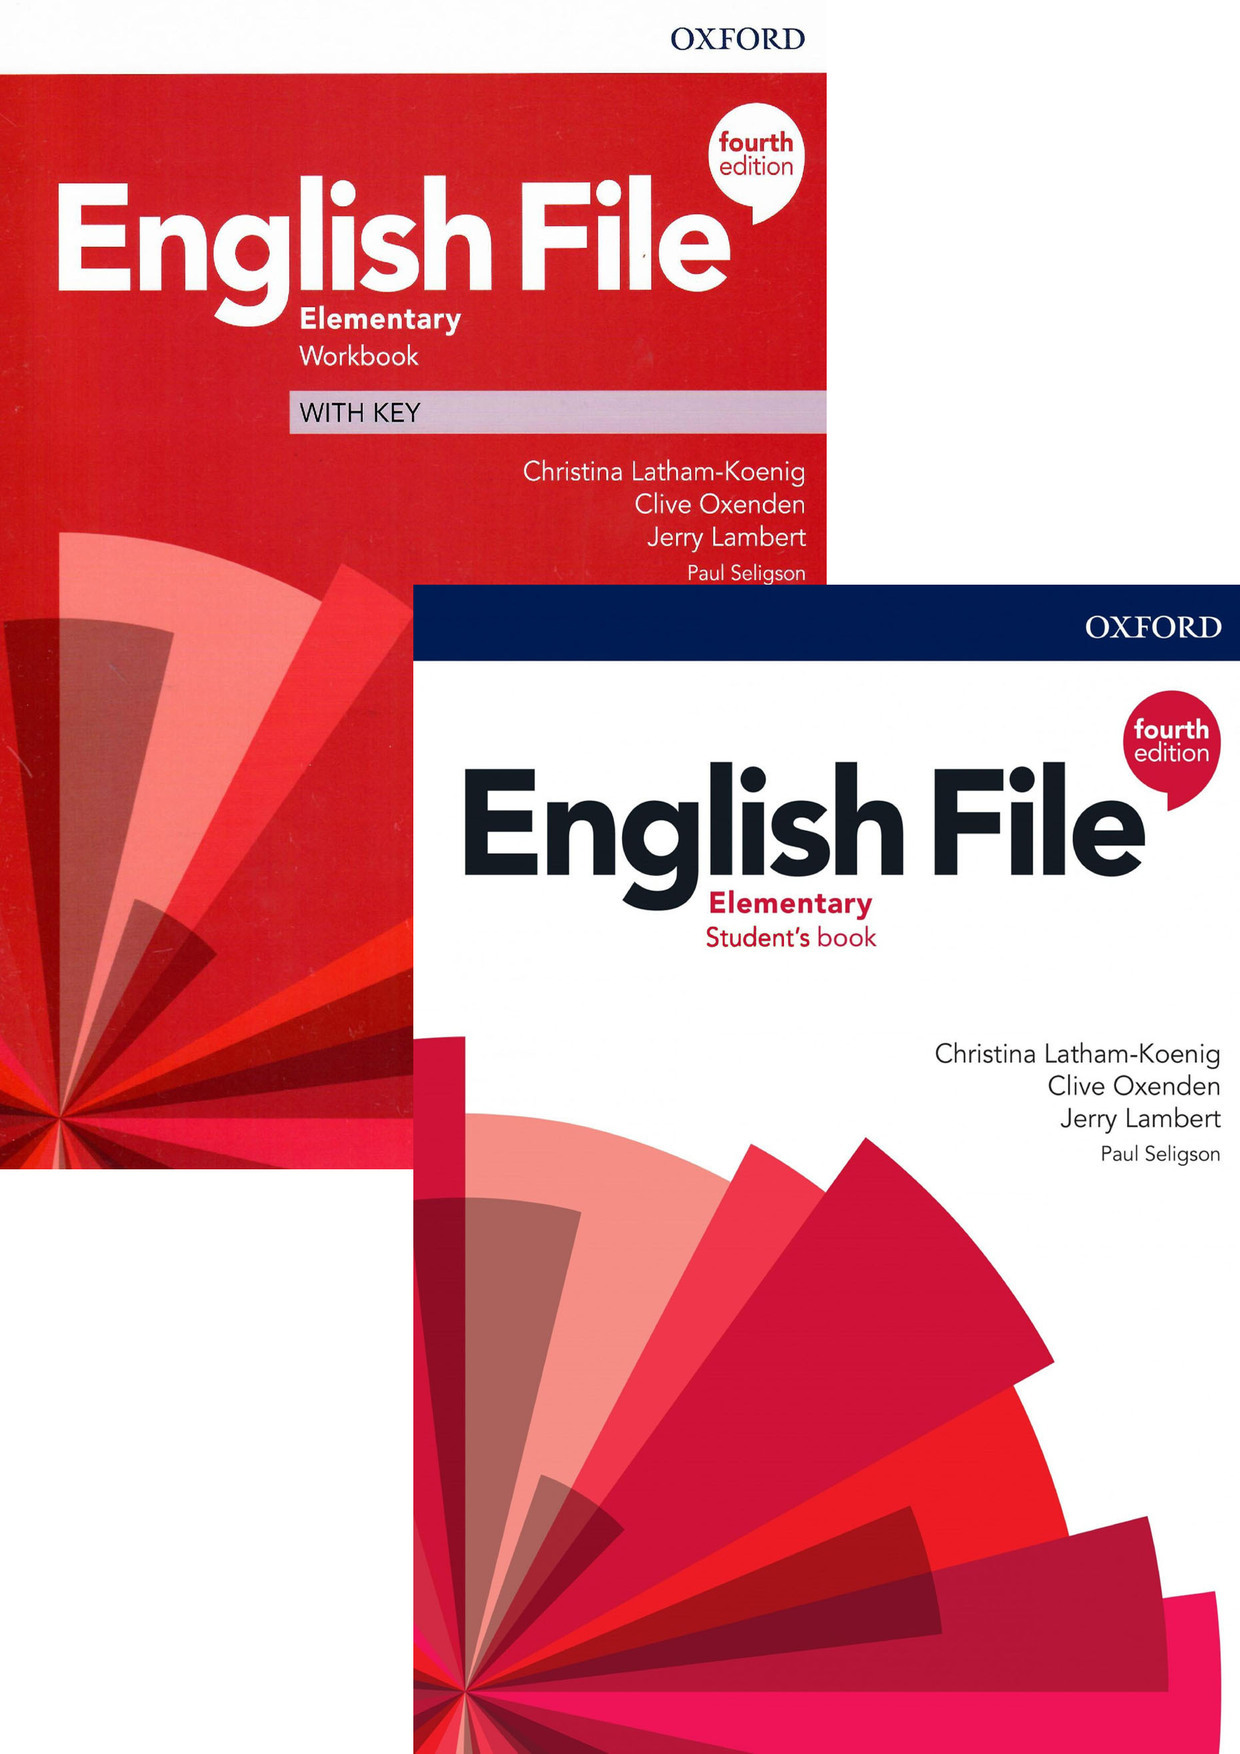 Elementary 4 edition. English file Elementary 4th Edition. English file 4th Edition Elementary ответы. English file Elementary Workbook 4th Edition. English file 4th Edition.